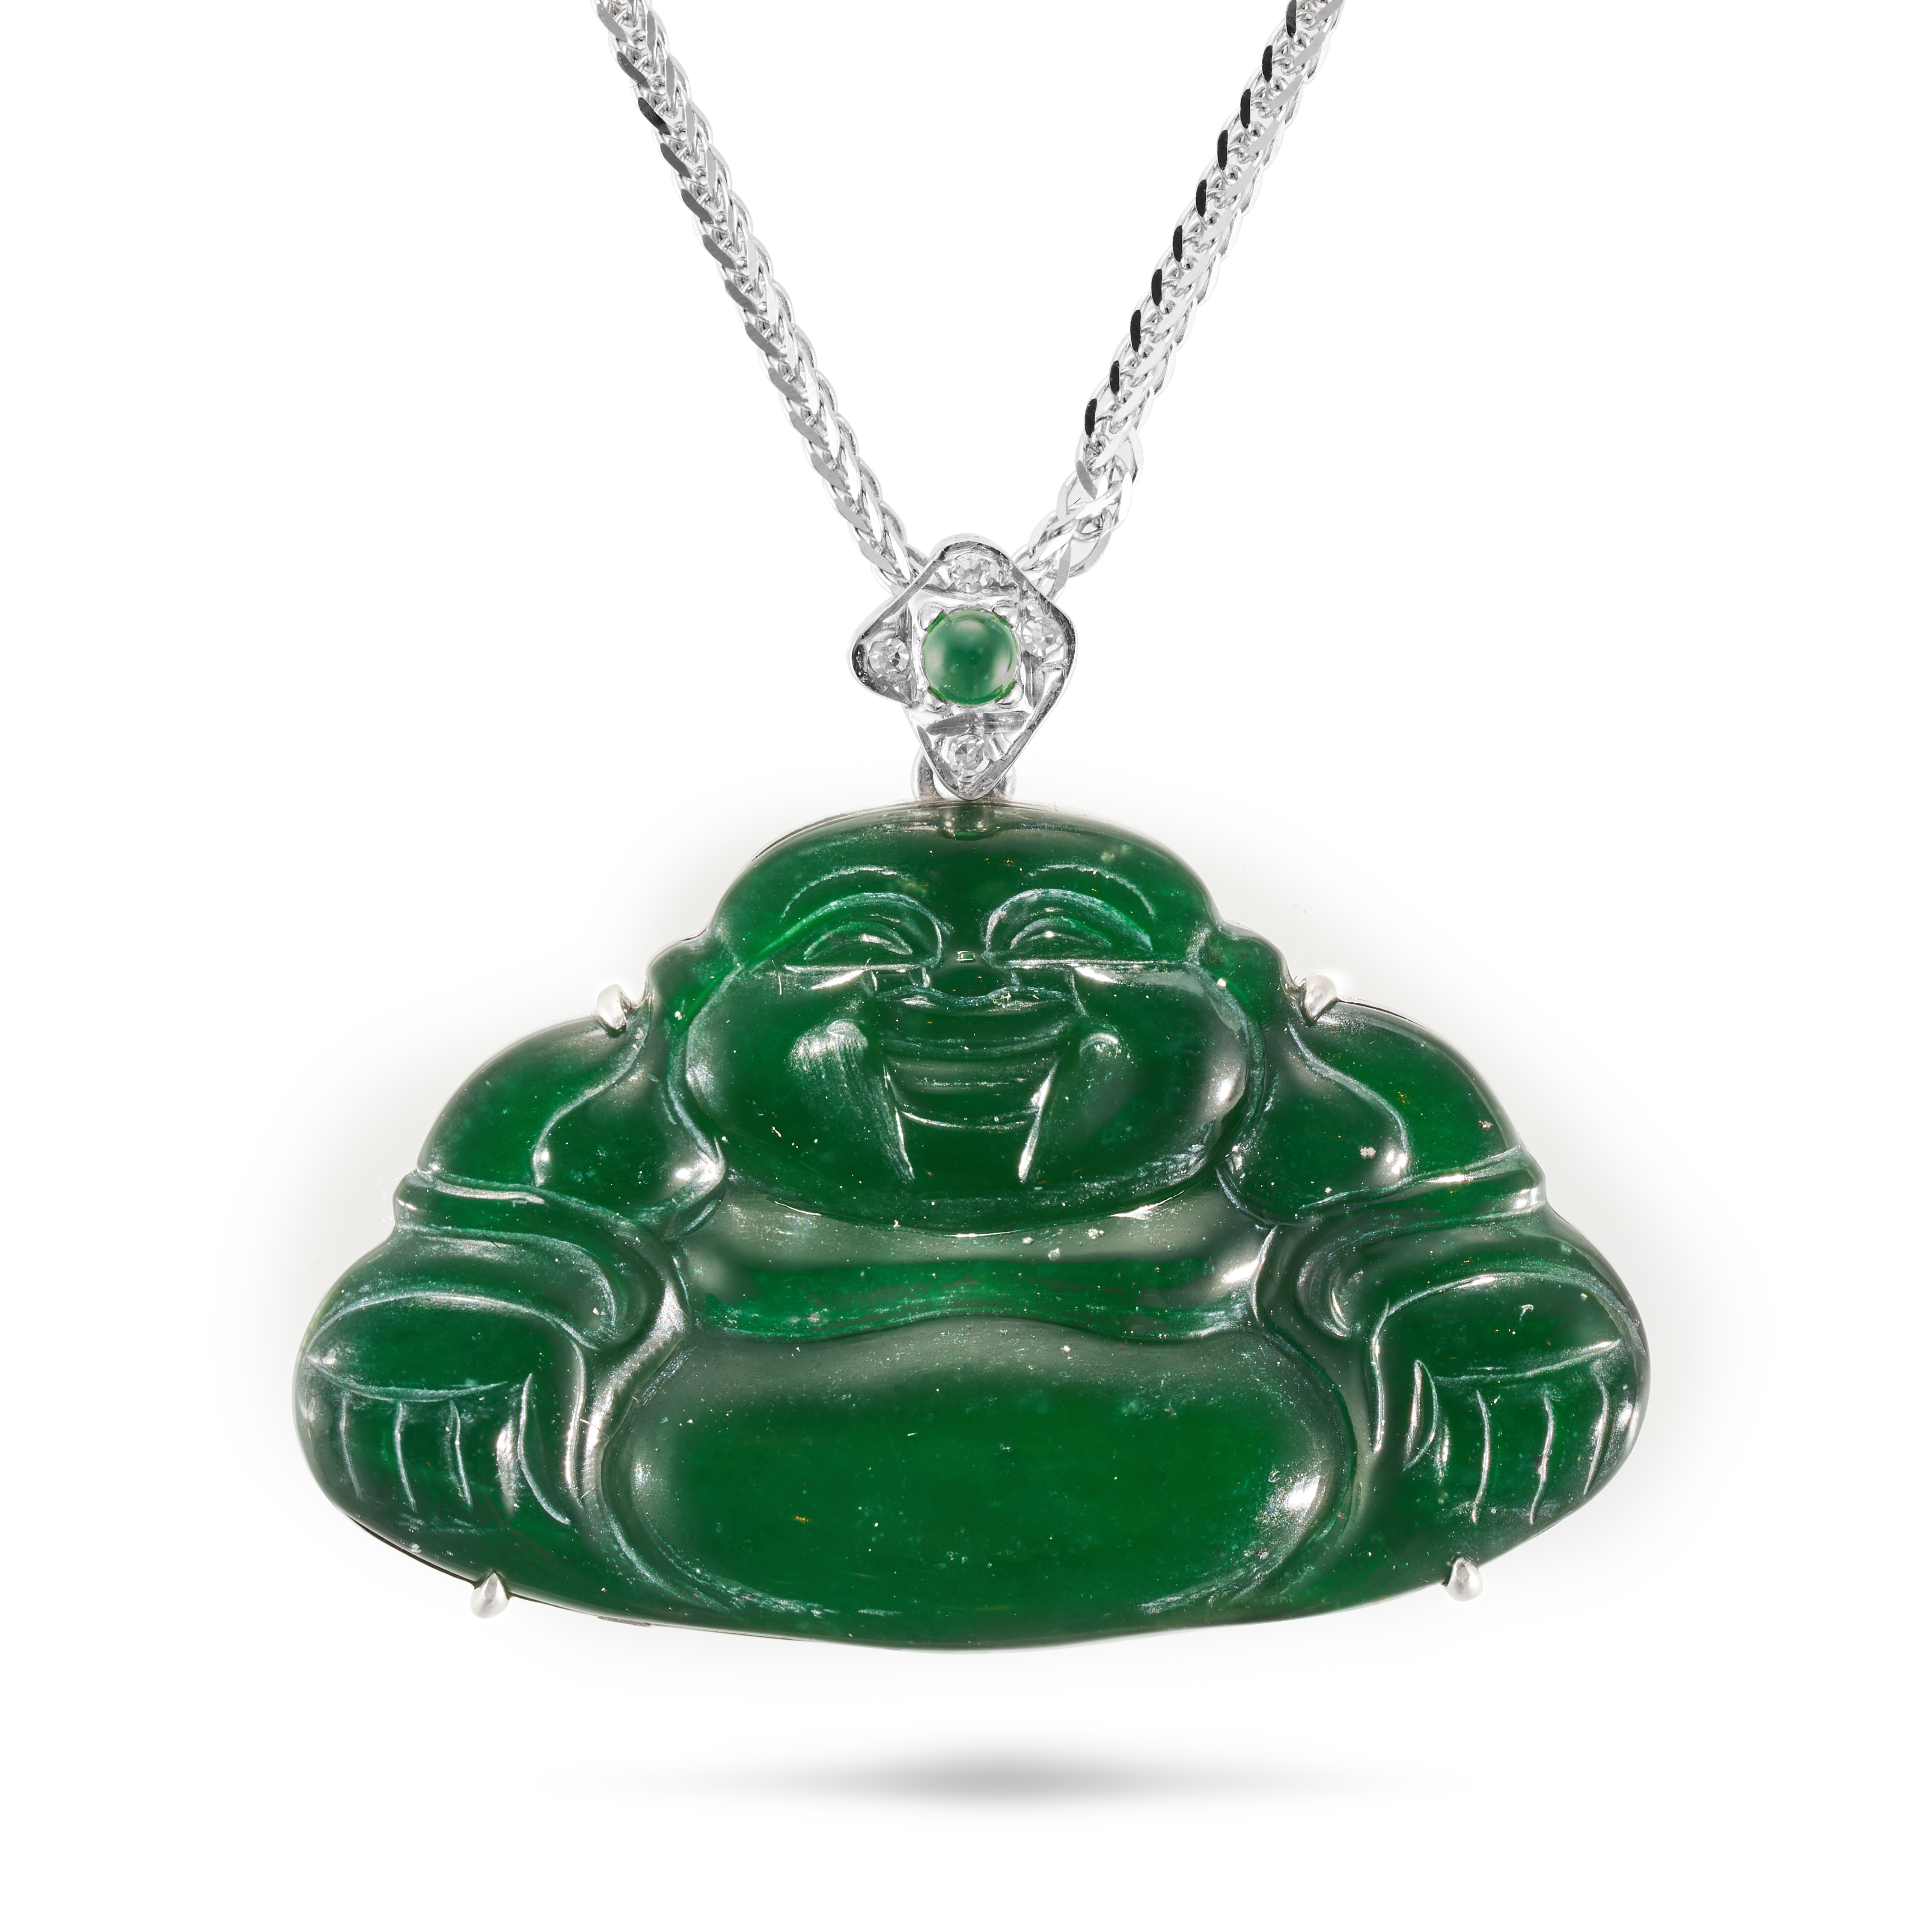 A NATURAL JADEITE JADE AND DIAMOND BUDDHA PENDANT NECKLACE the pendant set with a round cabochon ...